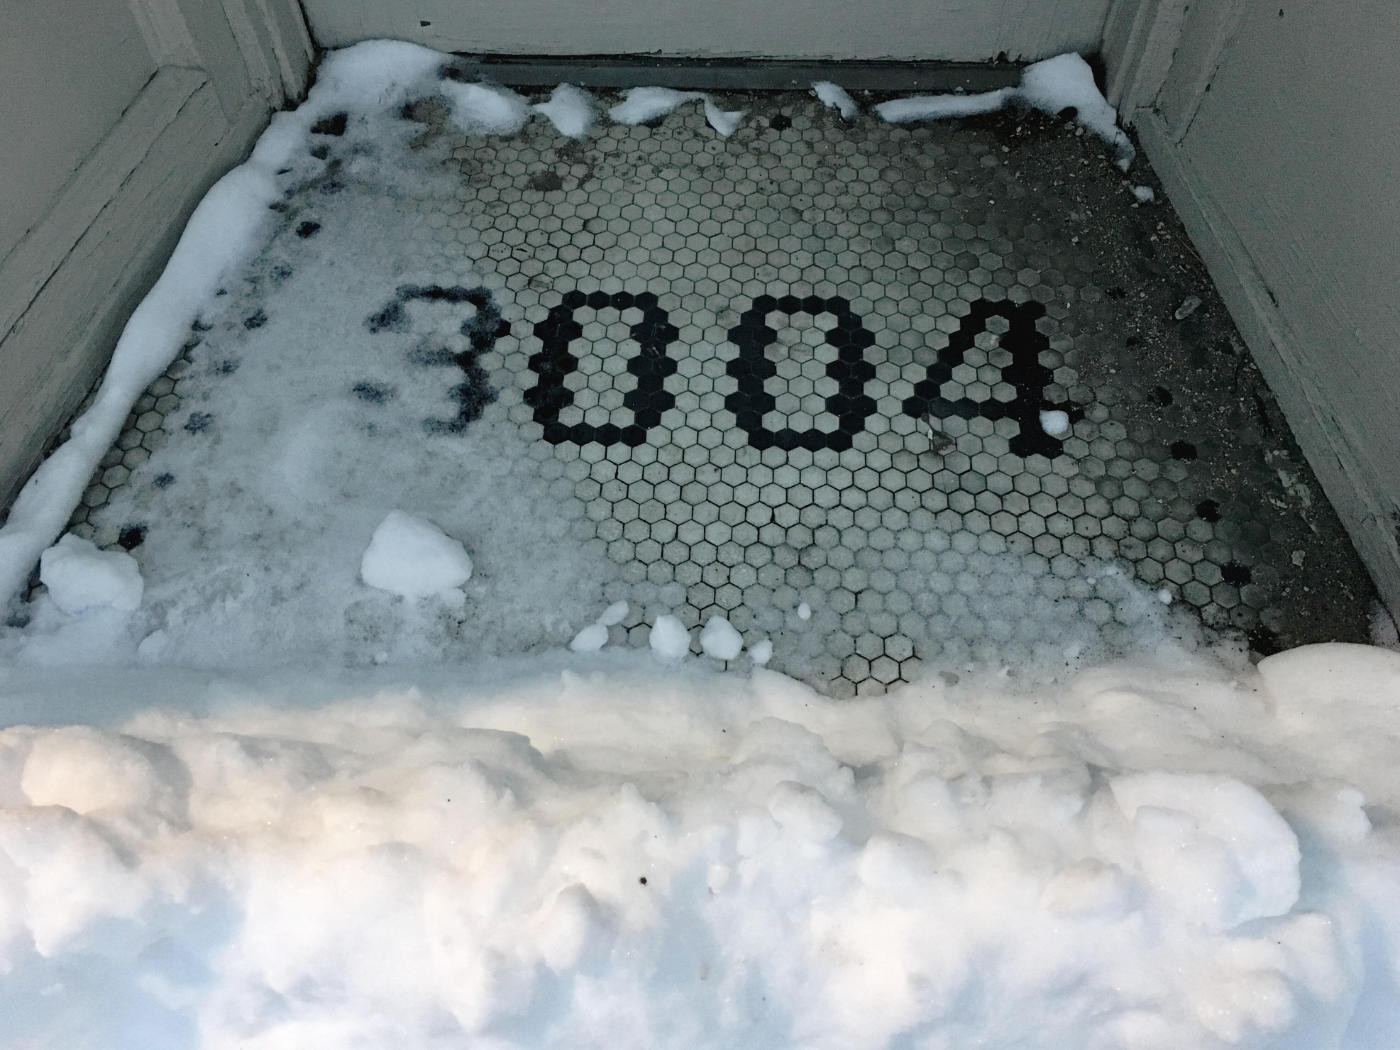 Tiled entryway floor with number 3004 in it, plus snow in the foreground